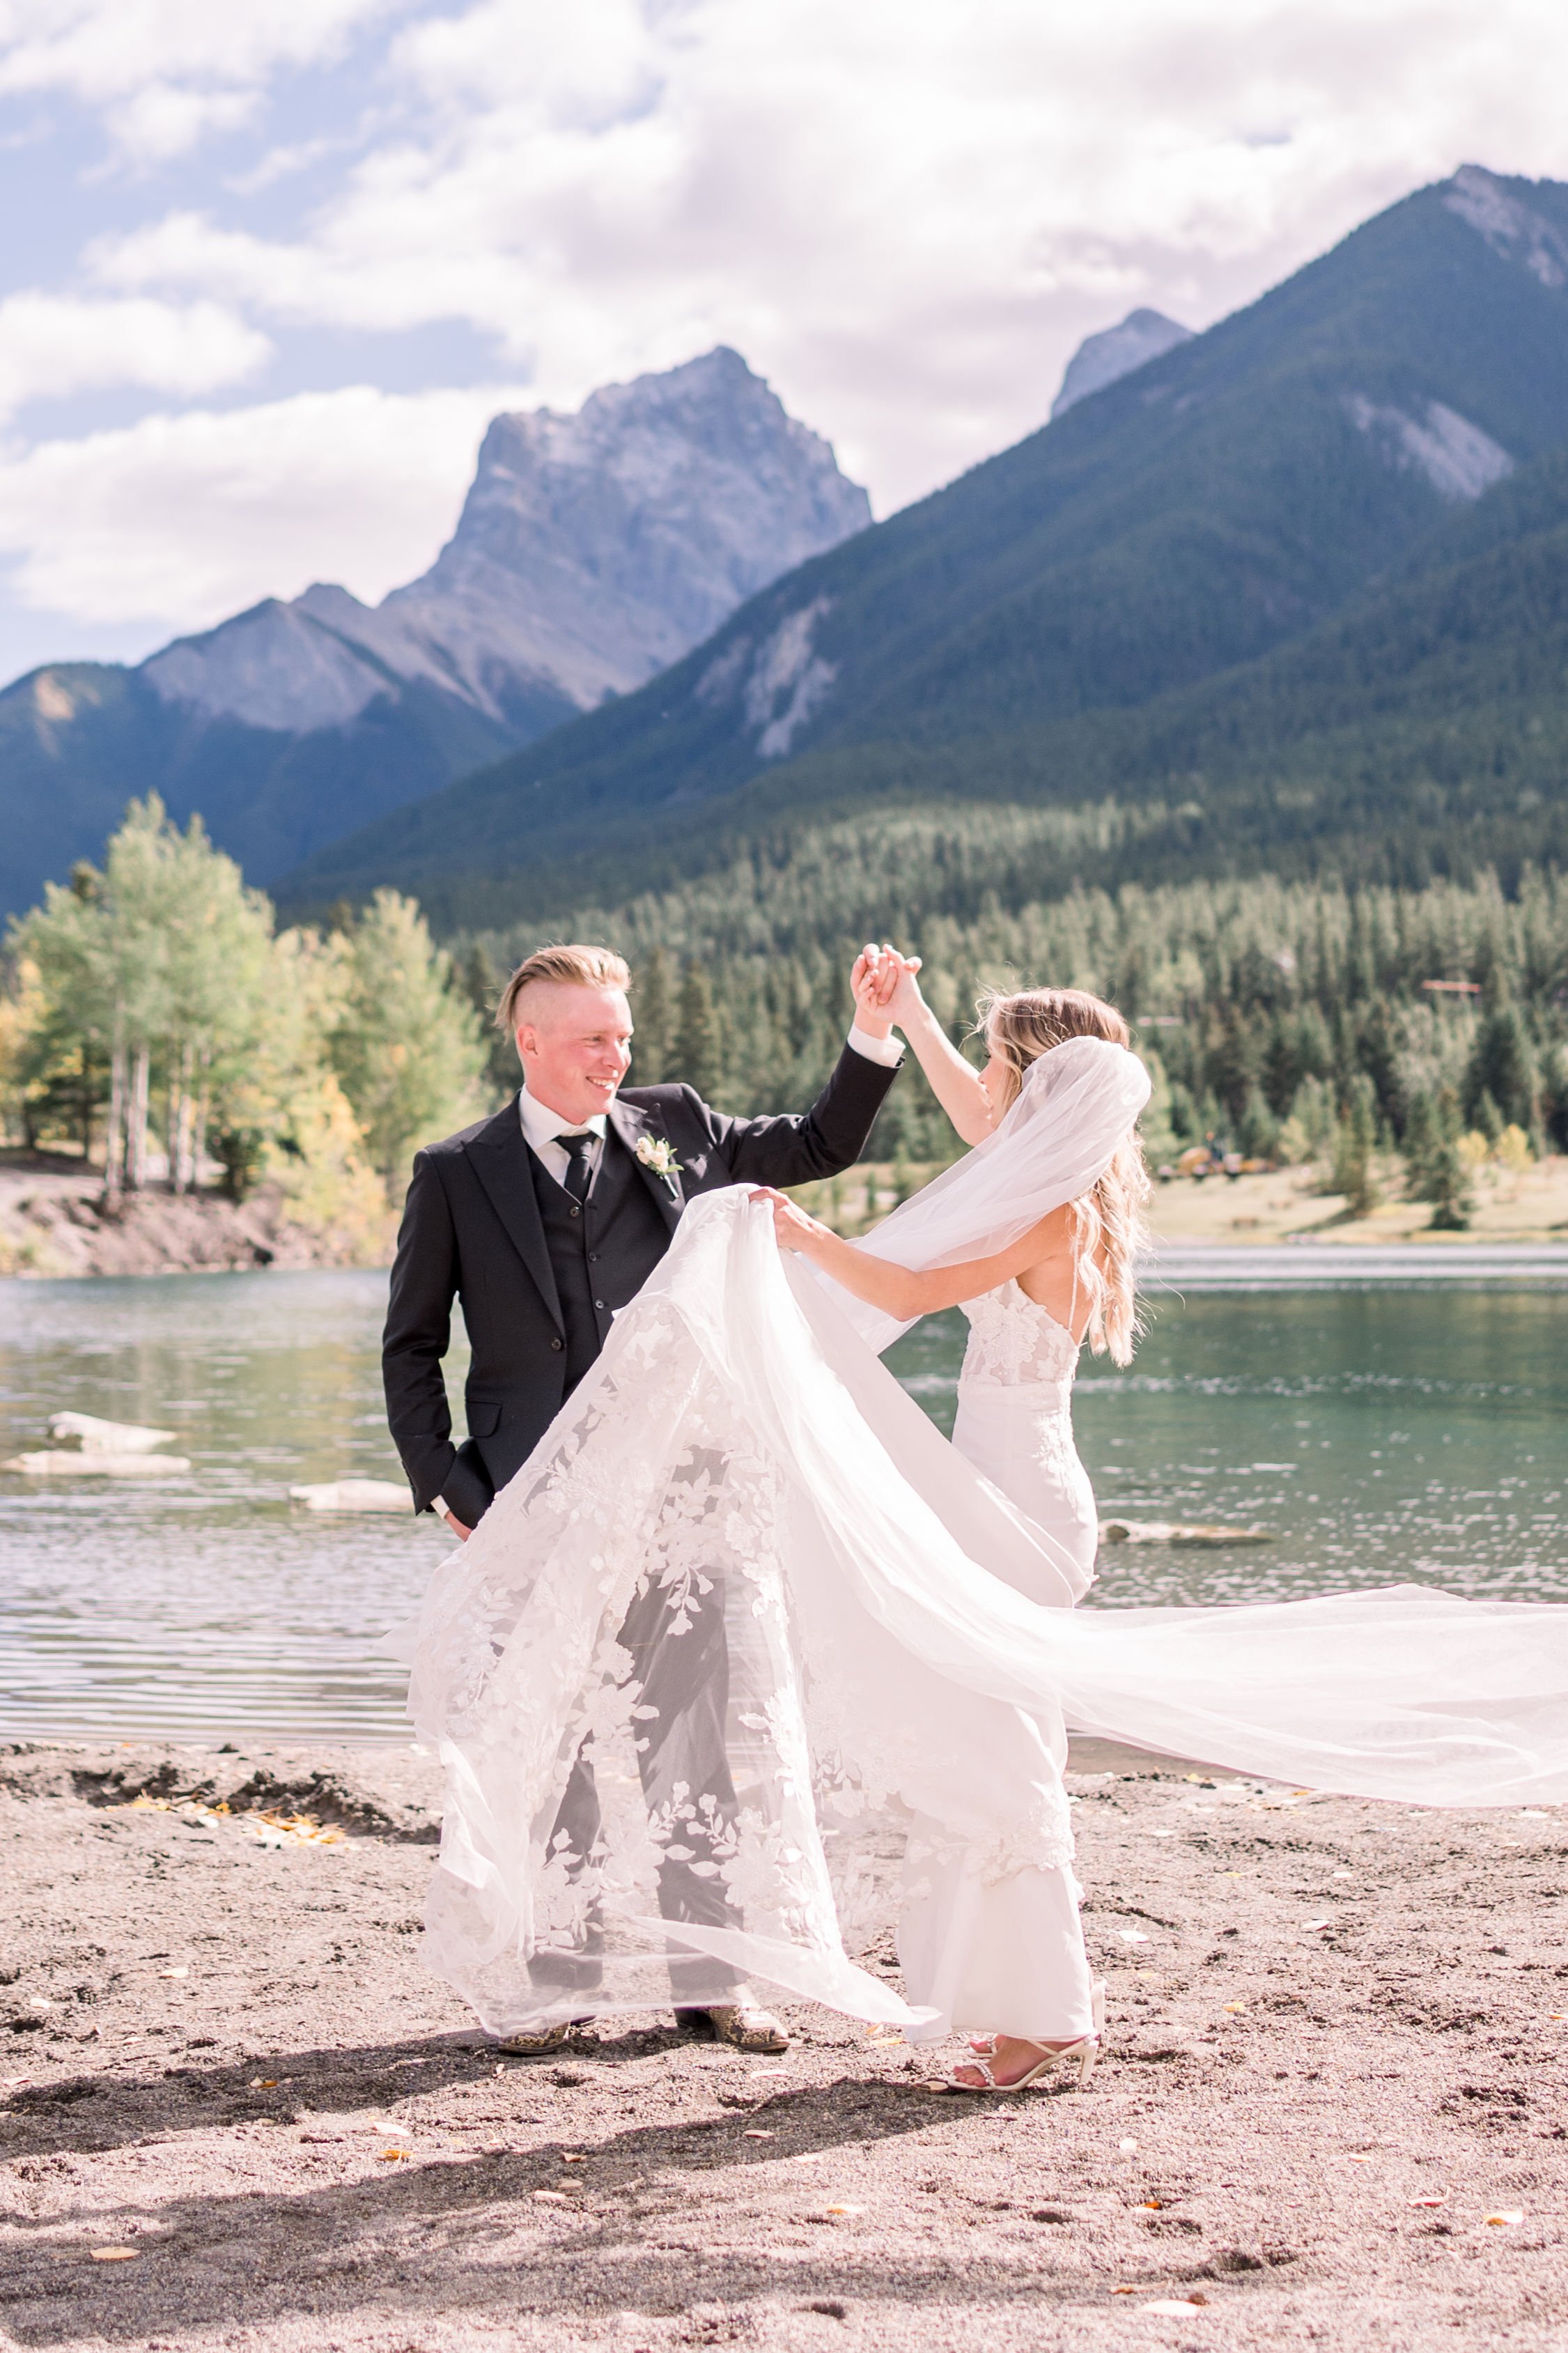  Chelsea Mason Photography captures a bride and groom dancing on a mountain next to a lake. summer weddings in Canada #Albertaweddings #shesaidyes #Albertaweddingphotographers #SilvertipGolfCourse #ChelseaMasonPhotography #ChelseaMasonWeddings  